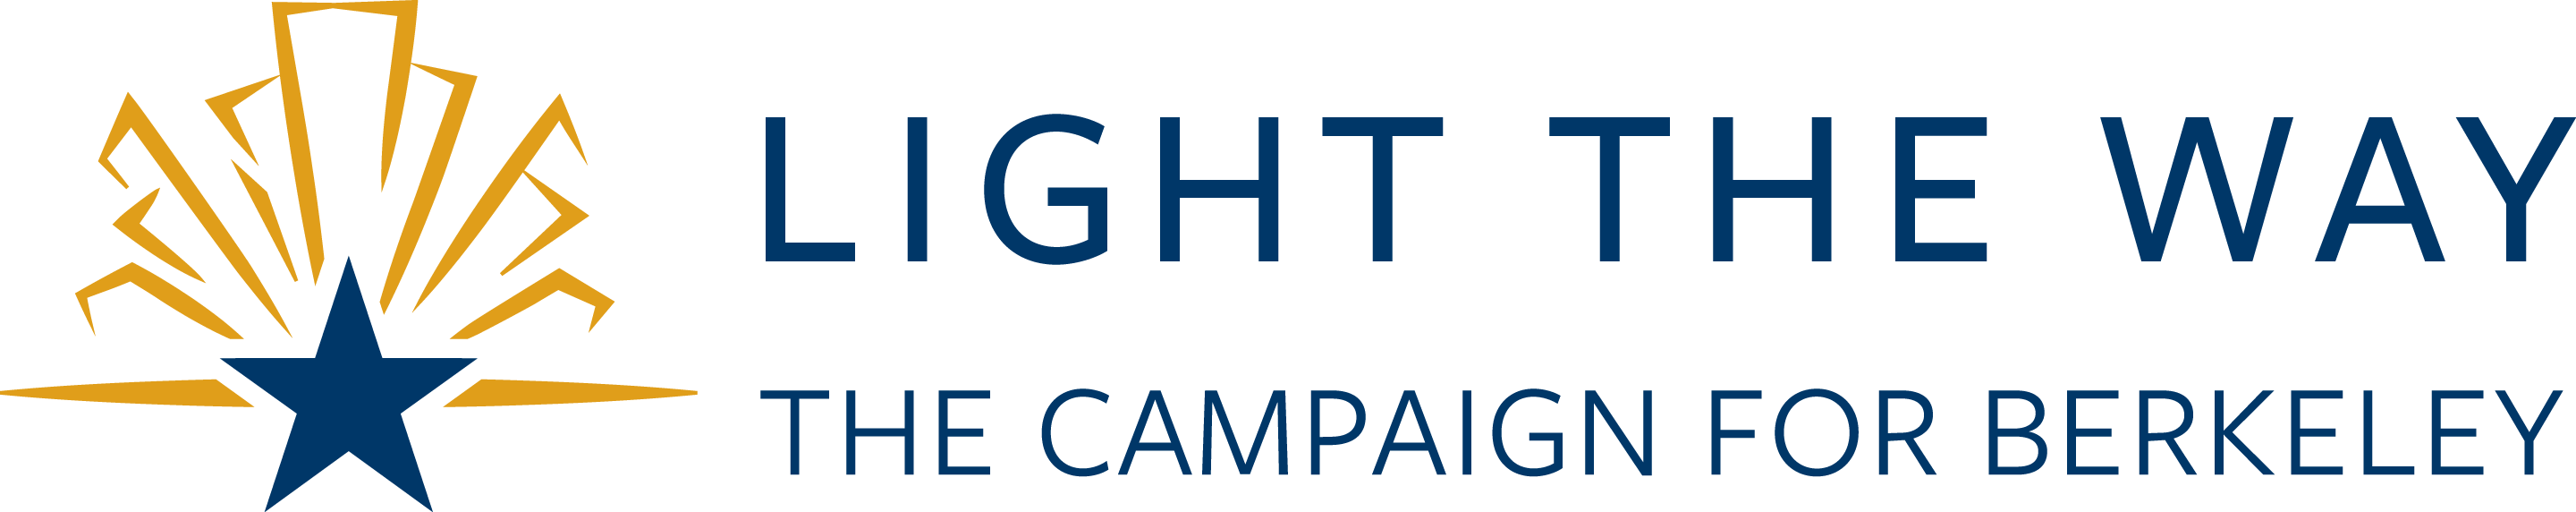 'Light The Way - The Campaign for Berkeley' logo